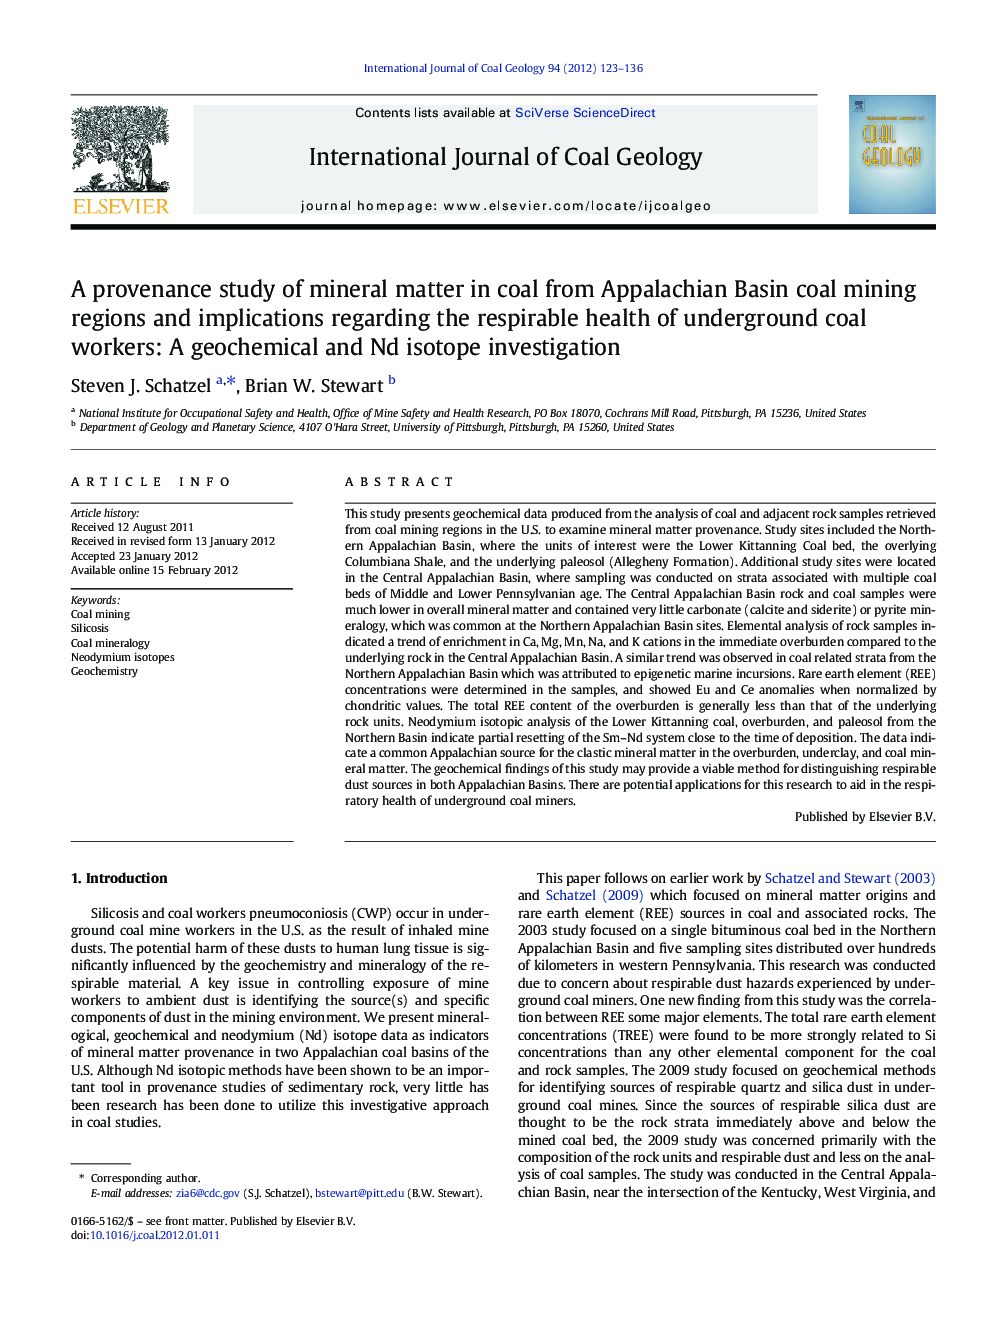 A provenance study of mineral matter in coal from Appalachian Basin coal mining regions and implications regarding the respirable health of underground coal workers: A geochemical and Nd isotope investigation